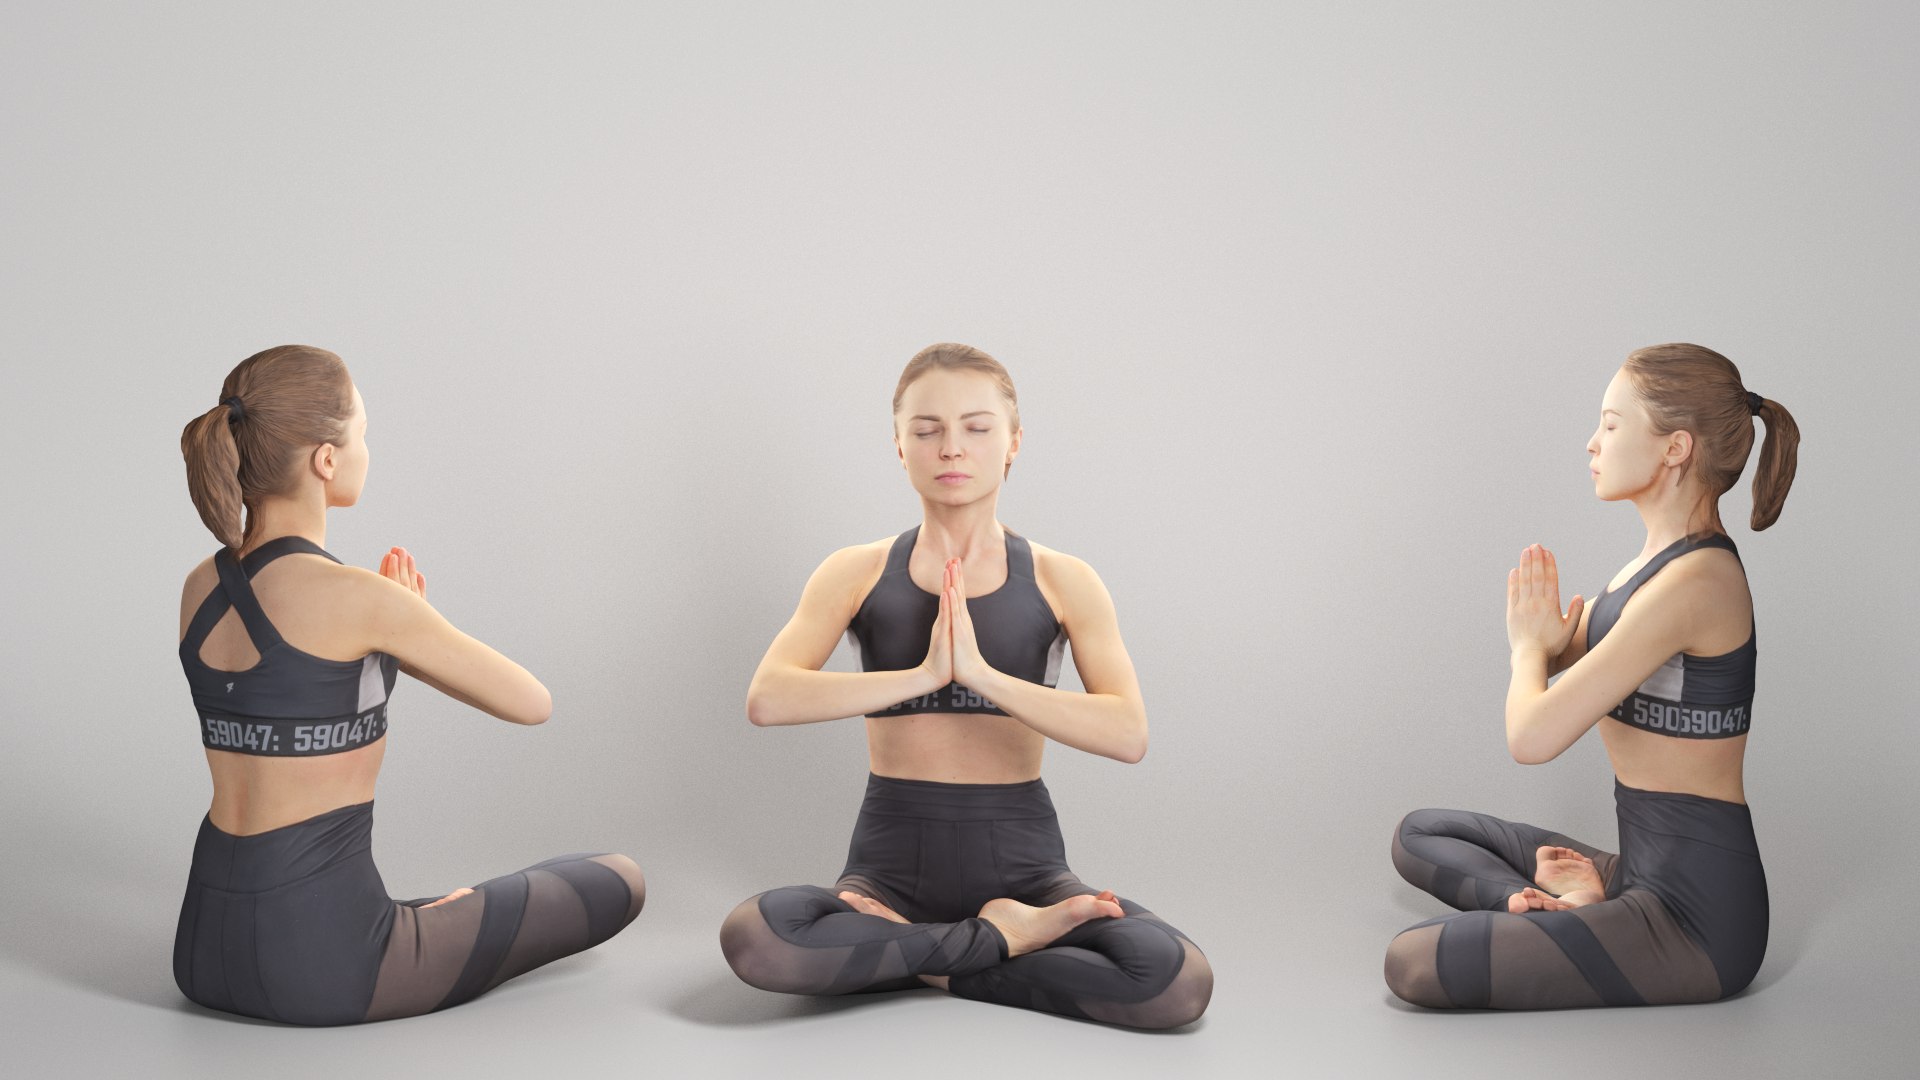 Find The Best Position For Meditation, Importance Of Correct Position